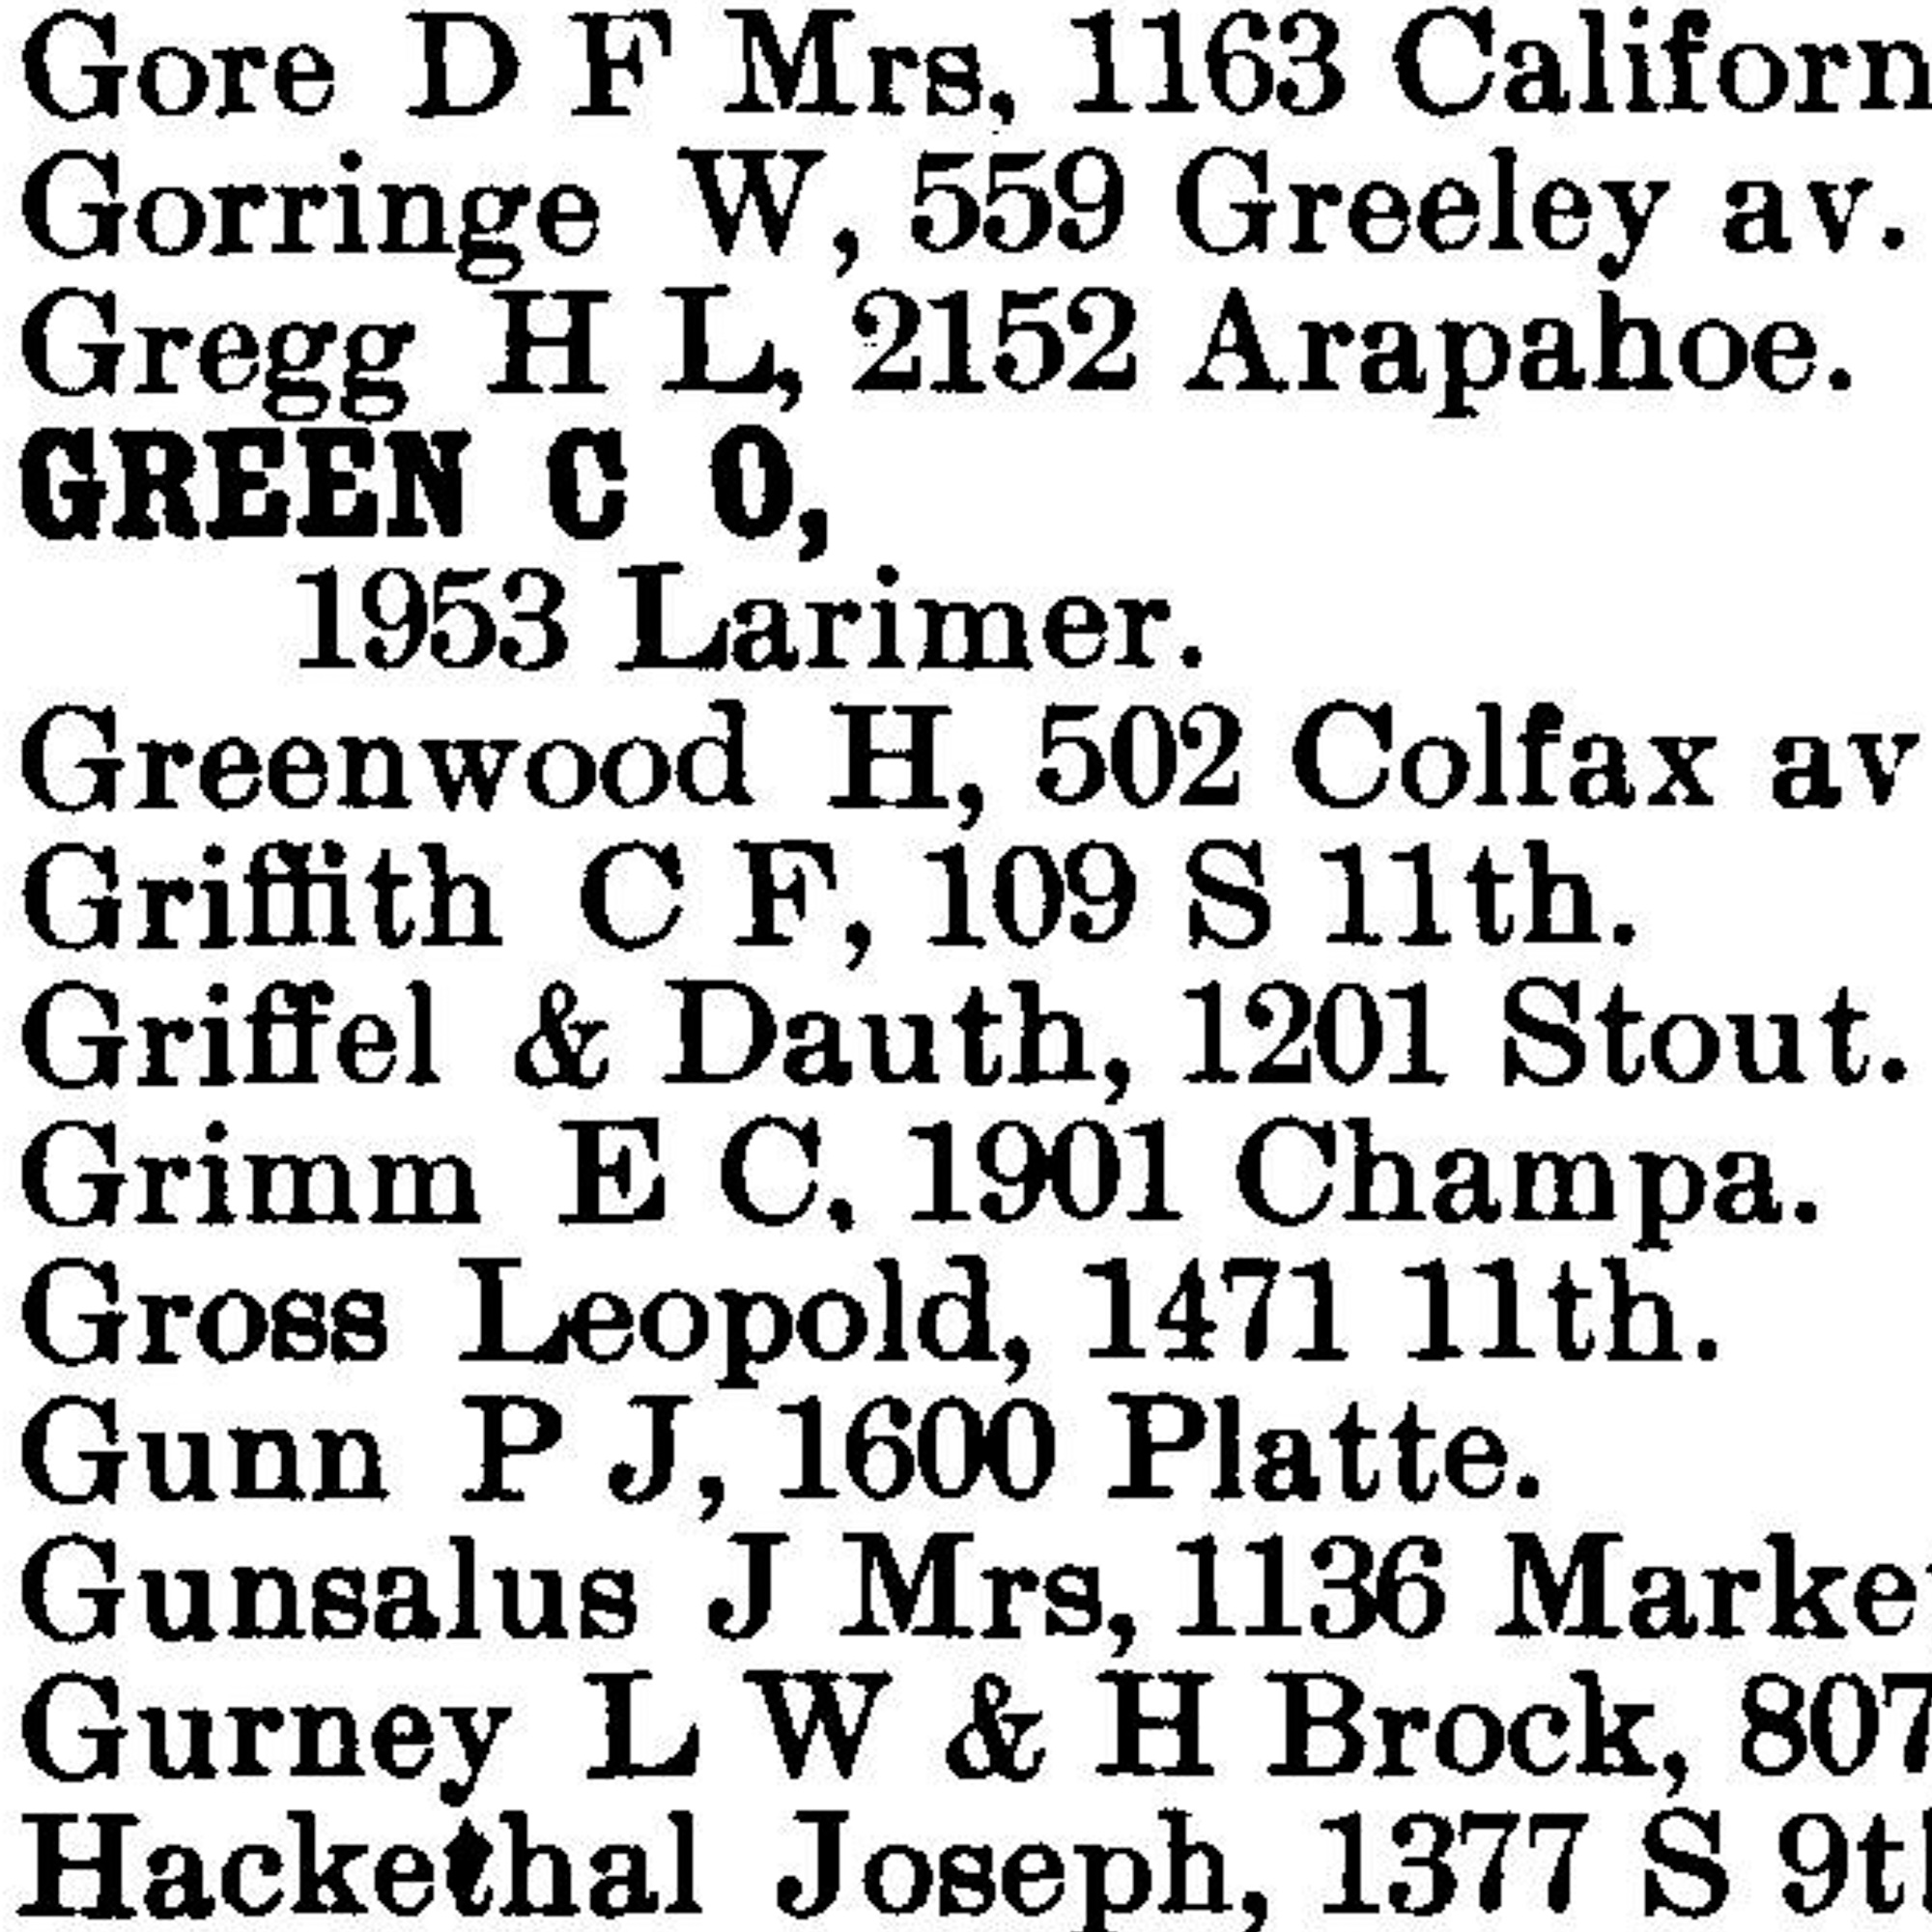 Dauth Family Archive - 1892 - Denver Directory - Entry for Griffel and Dauth